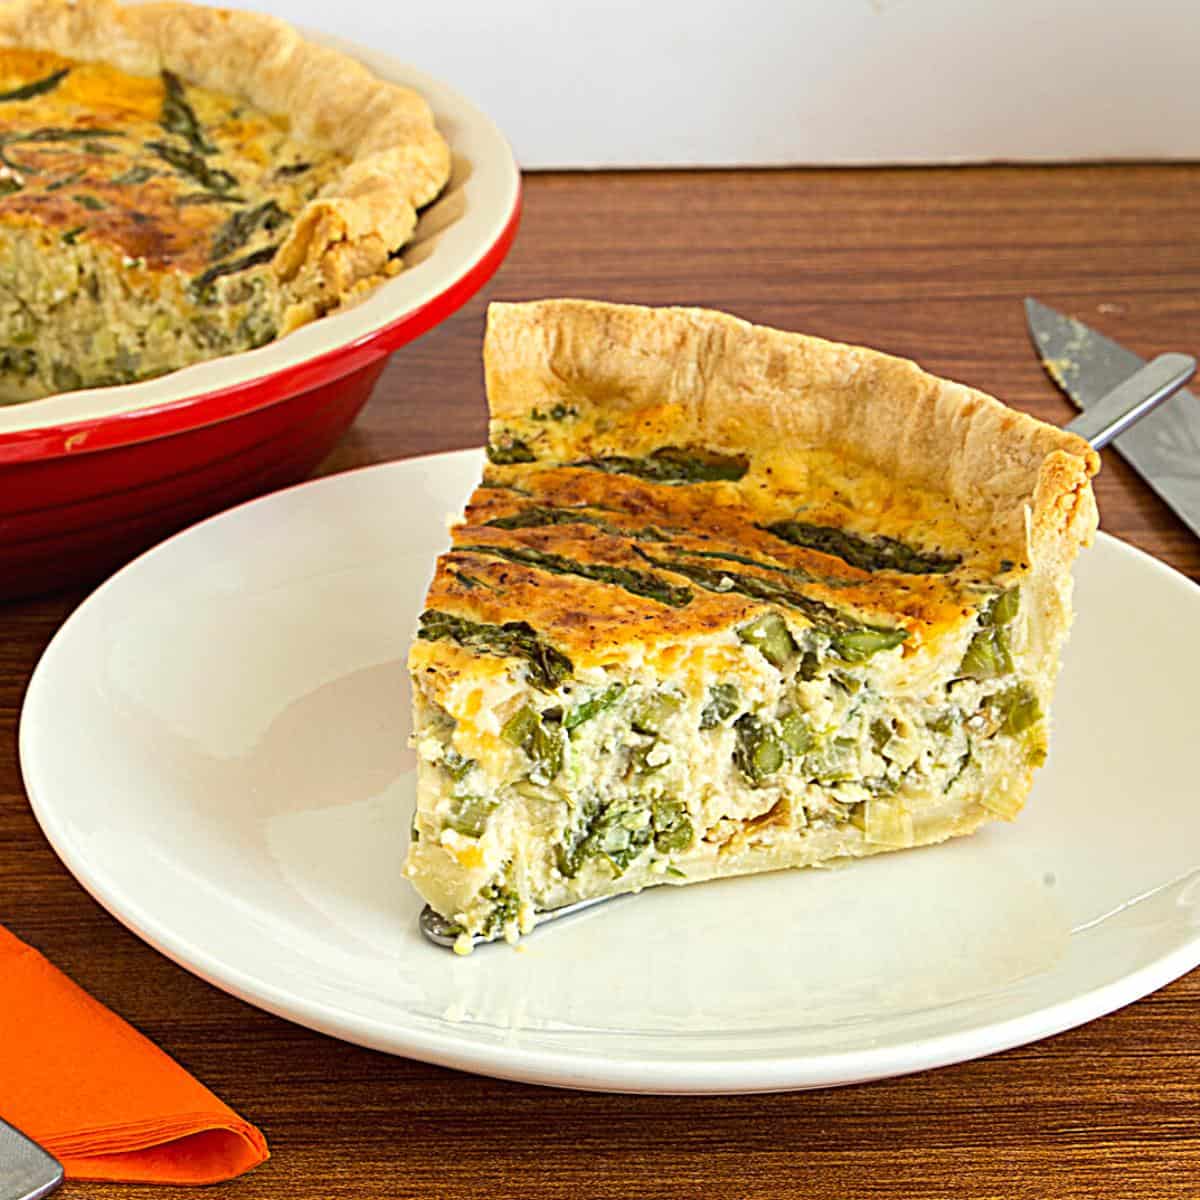 A slice of quiche with leeks and asparagus.